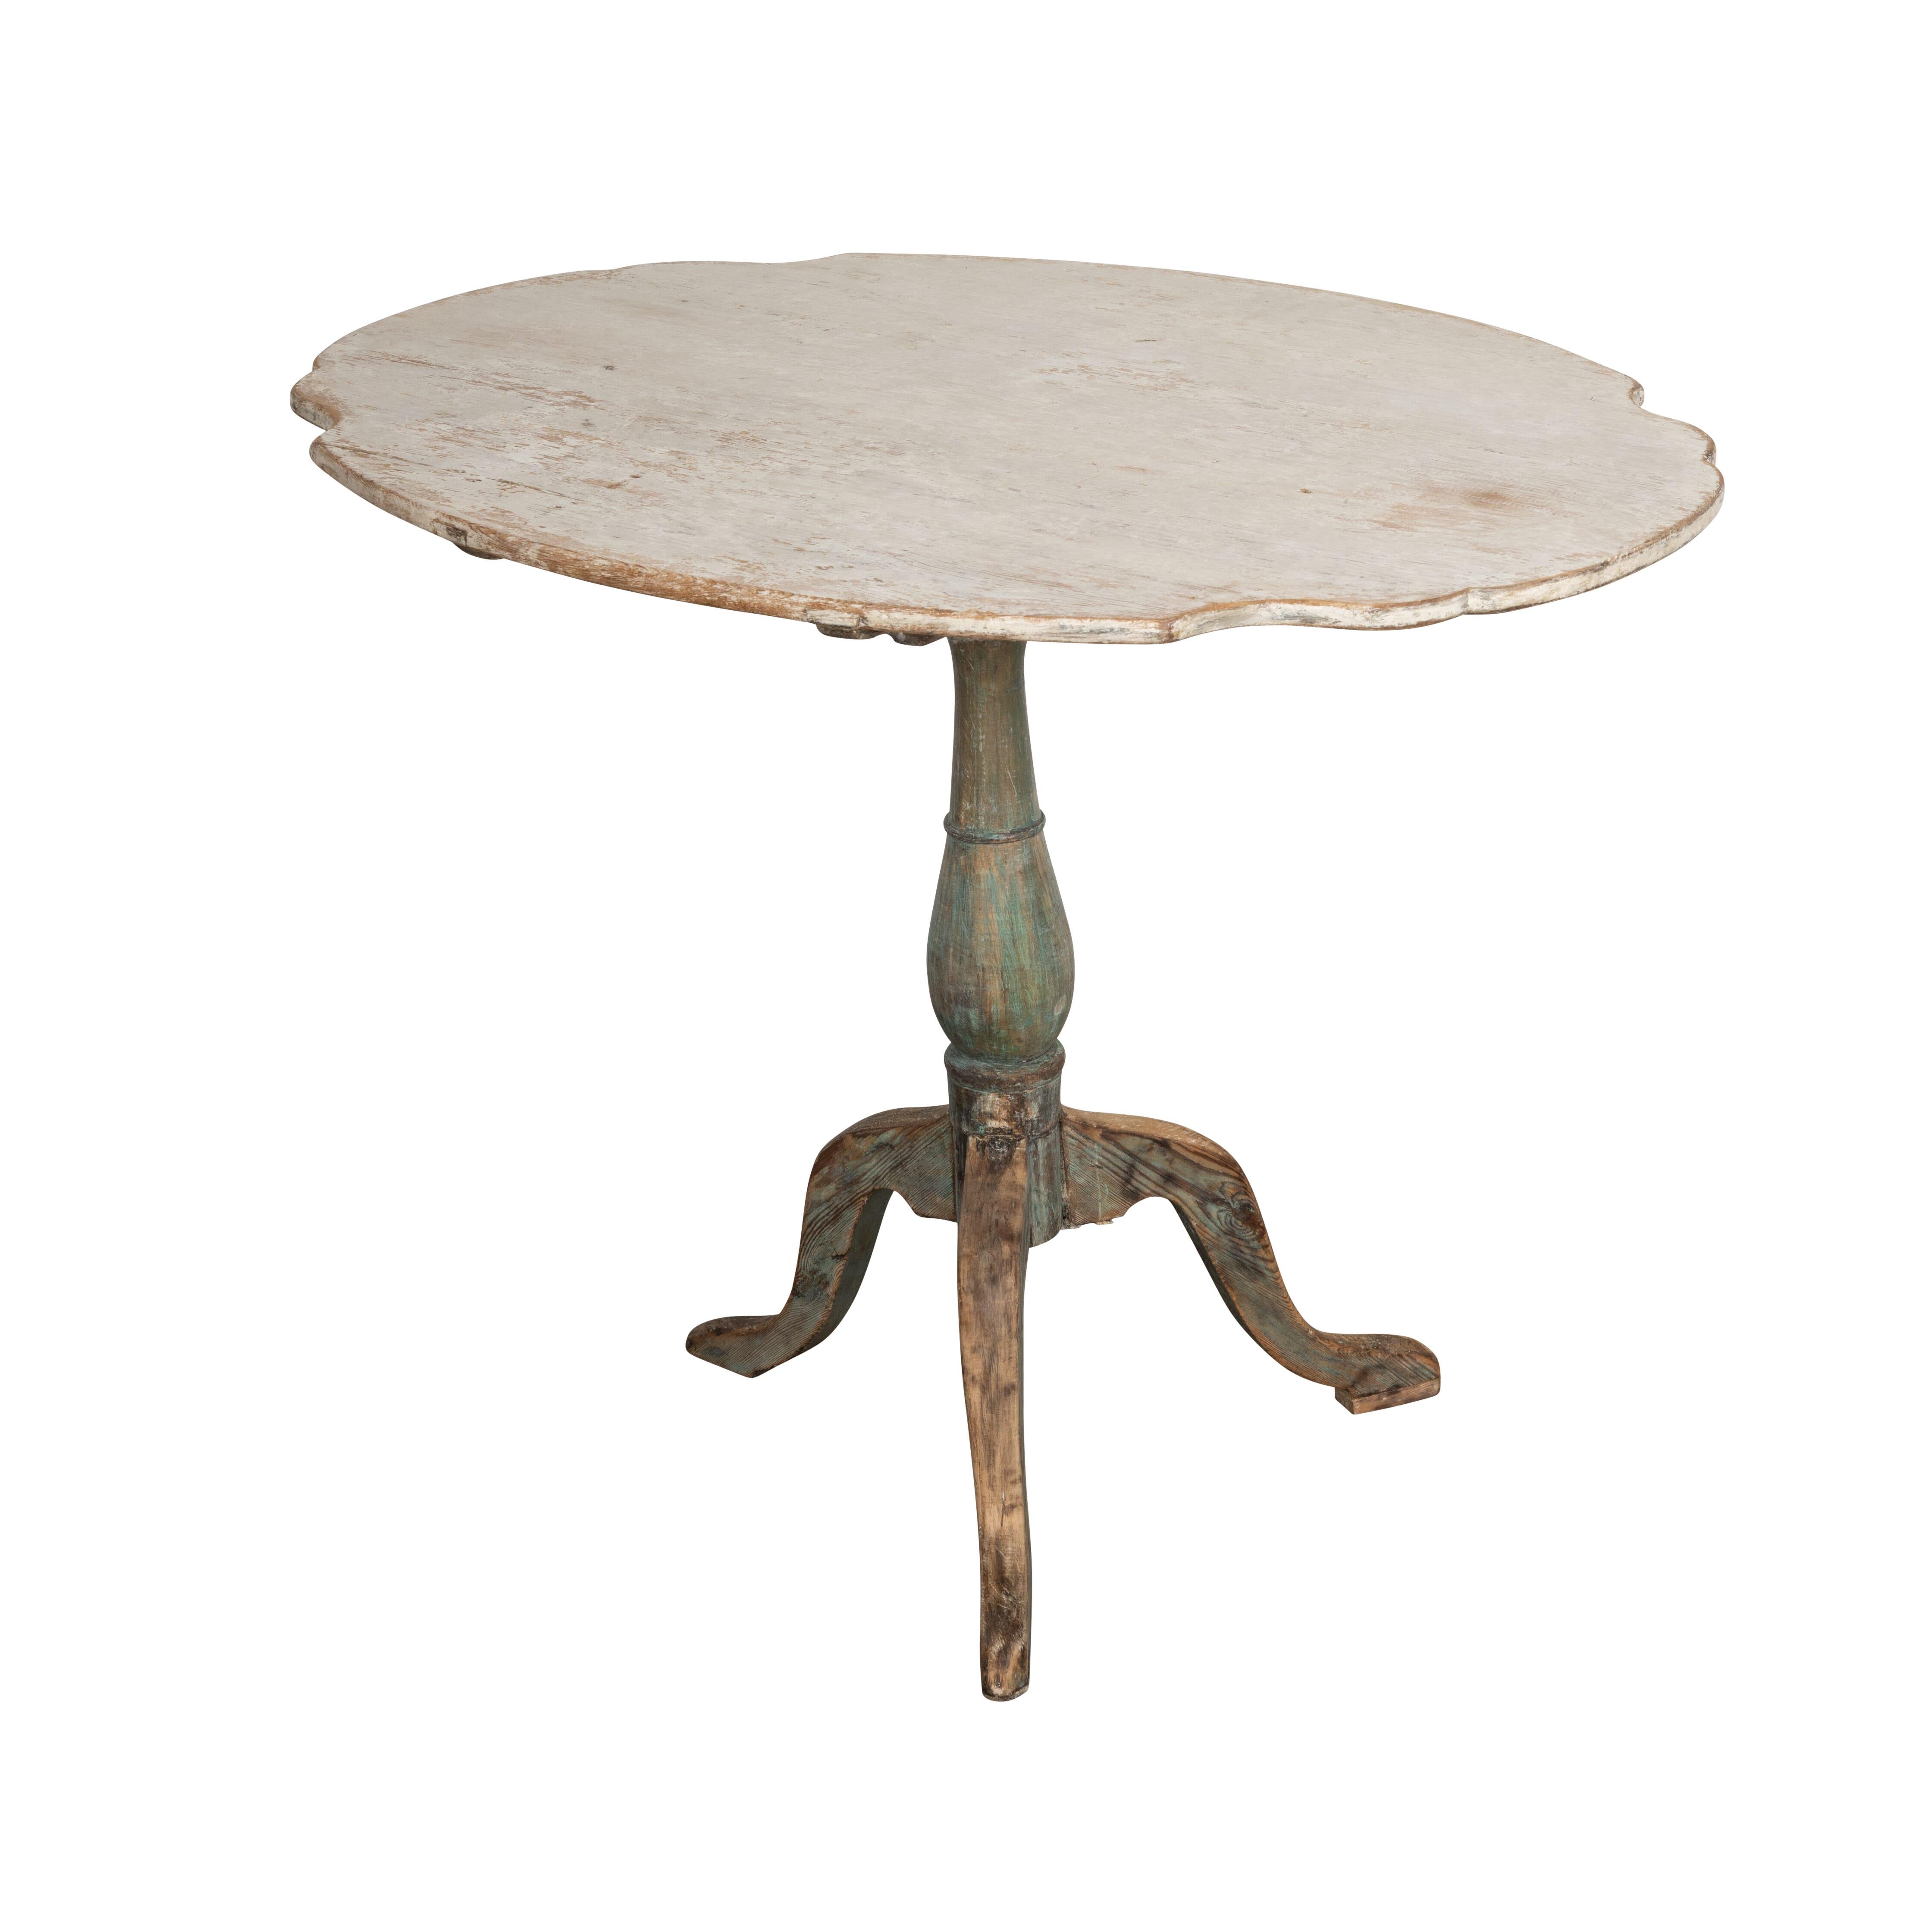 18th Century Swedish tilt top table.
With a decorative shaped top below a tripod base. Dry scraped back to original paint.